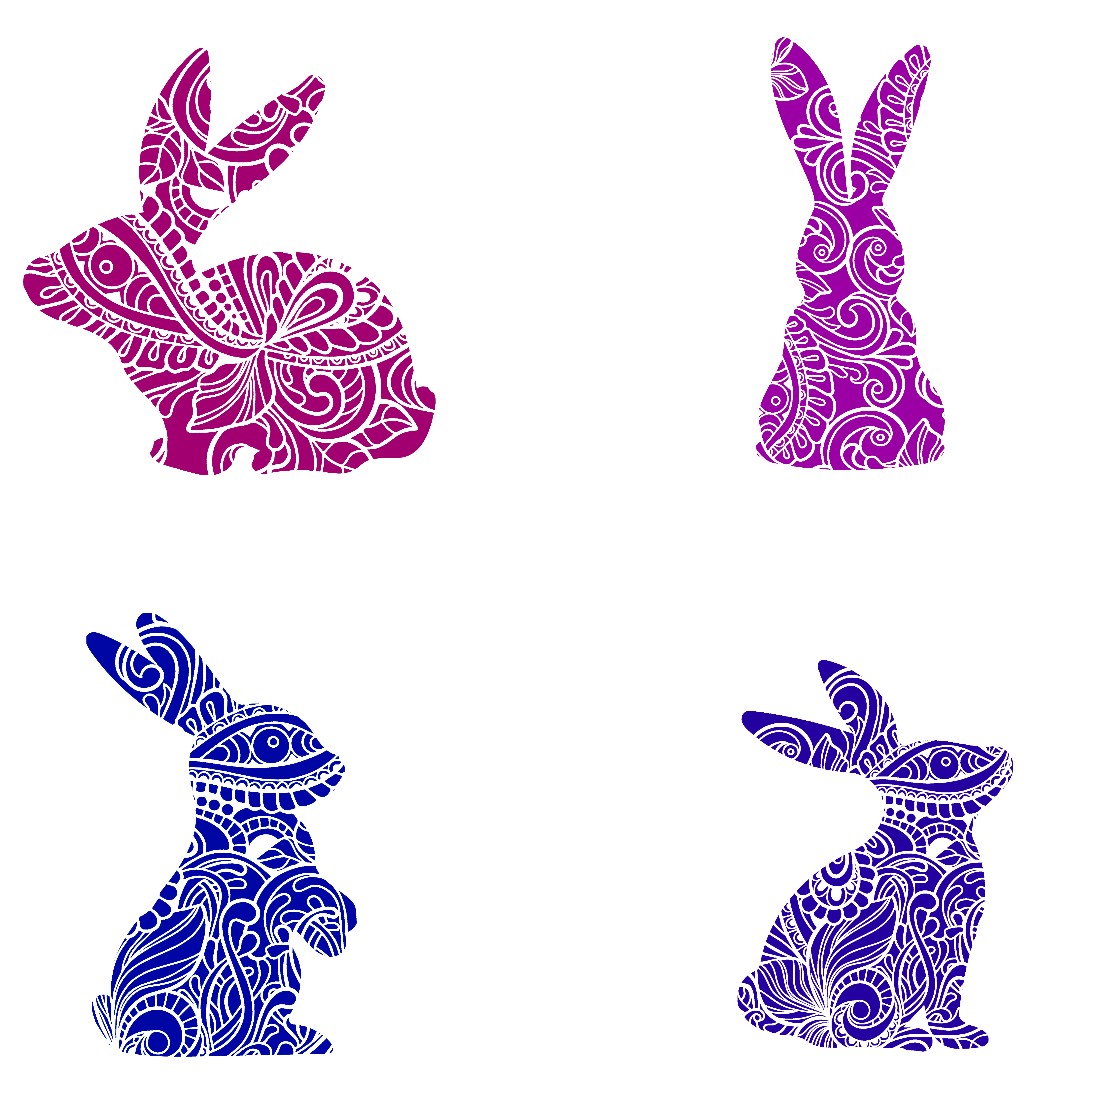 Decorative Bunny Set of 6 Stickers Muliti Colored Animal SVG Files preview image.